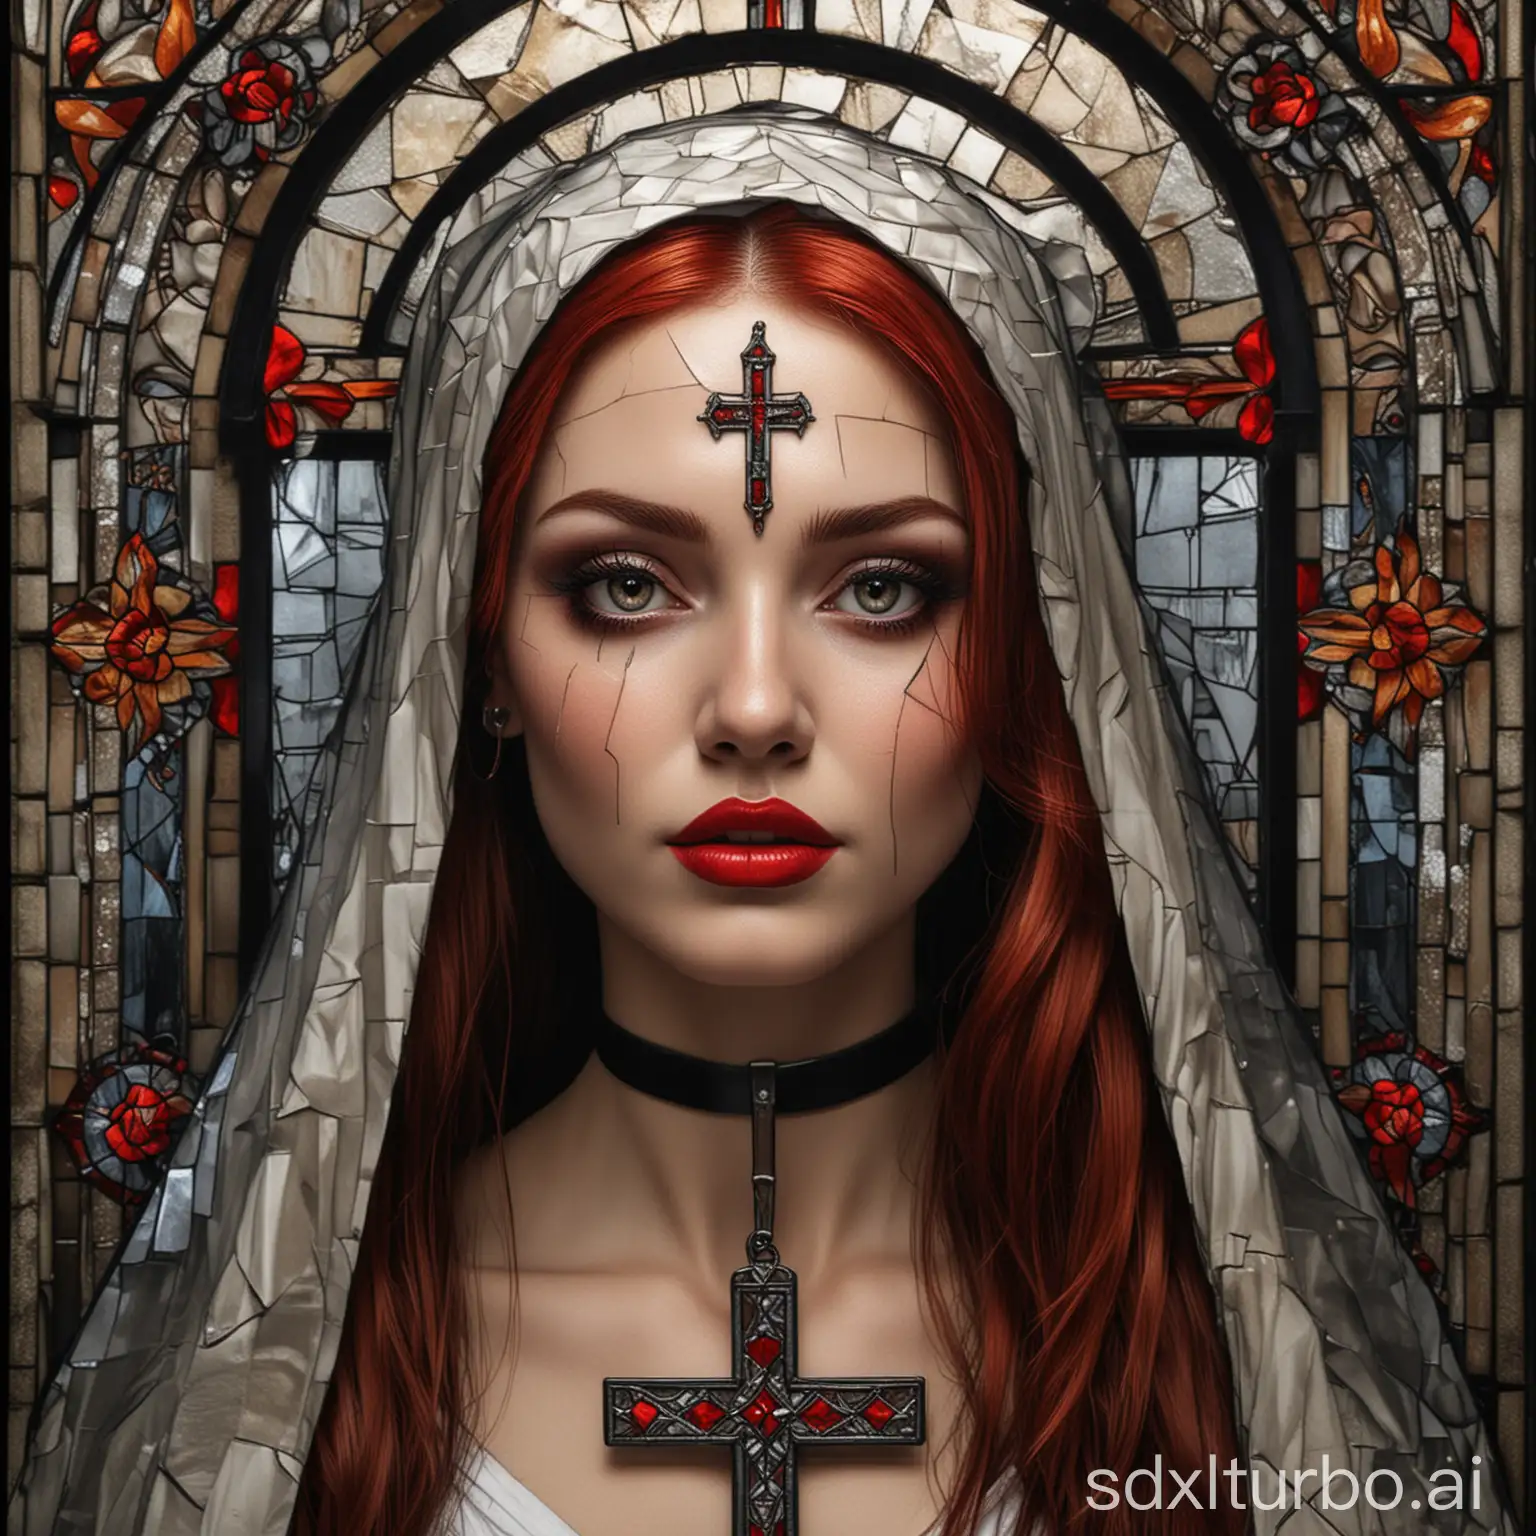 A full bodied mesmerizing pretty nun w/ long red hair&red holy tattoos,holding a titanium cross,wearing a banded hair scarf&red lipstick,in bg is a complex reflective mosaic made from stained glass window&jagged black glass.Her eyes have a captivating gaze,her lips painted in vivid hues that contrast beautifully against her skin tone.Designed by KarmaNinja Shards of light enhances her mysterious expression on her face.Lower right artist signature 'A.Peltola'